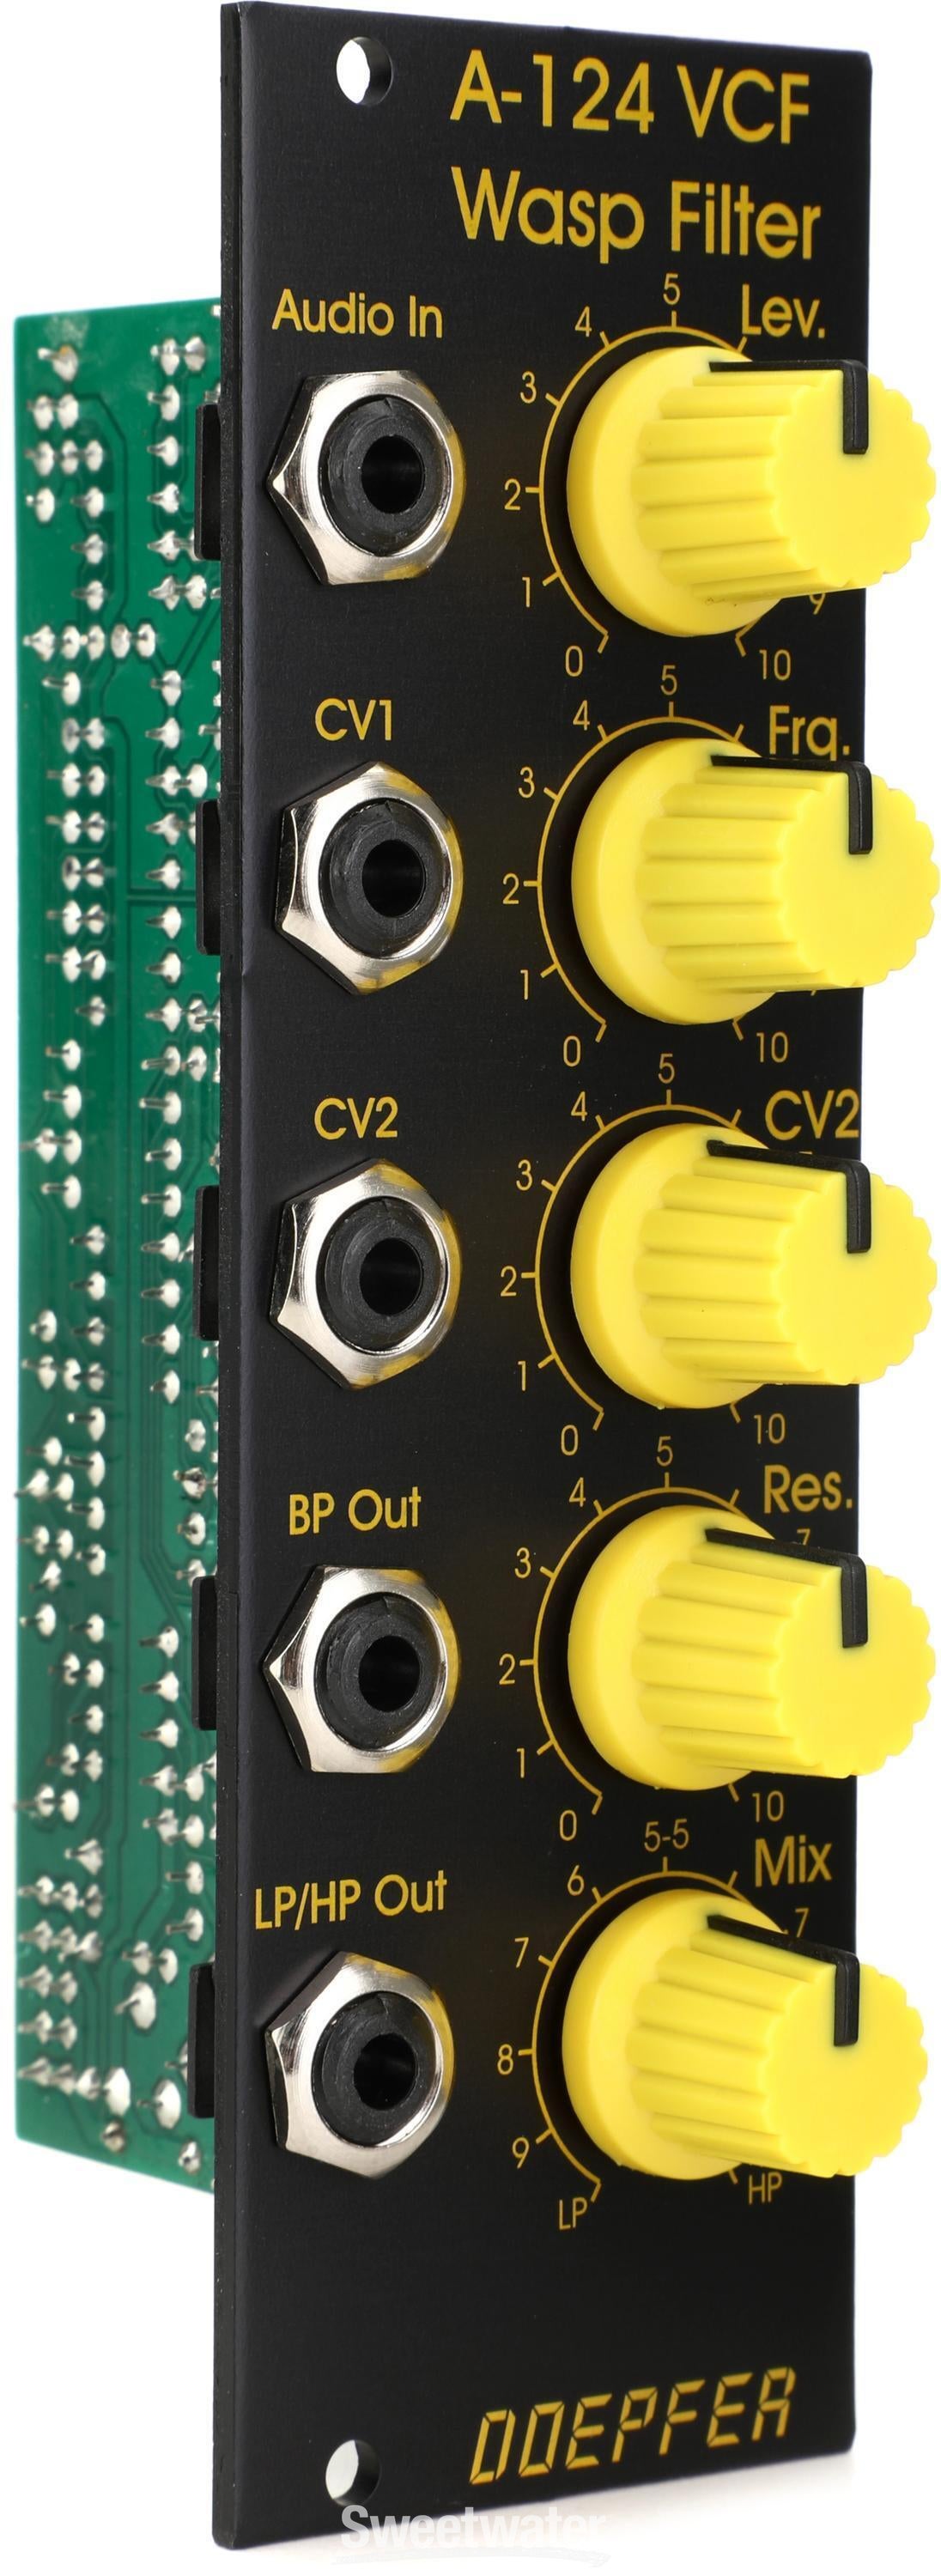 Doepfer A-124 VCF5 Wasp Filter Eurorack Module - Special Edition  Yellow/Black